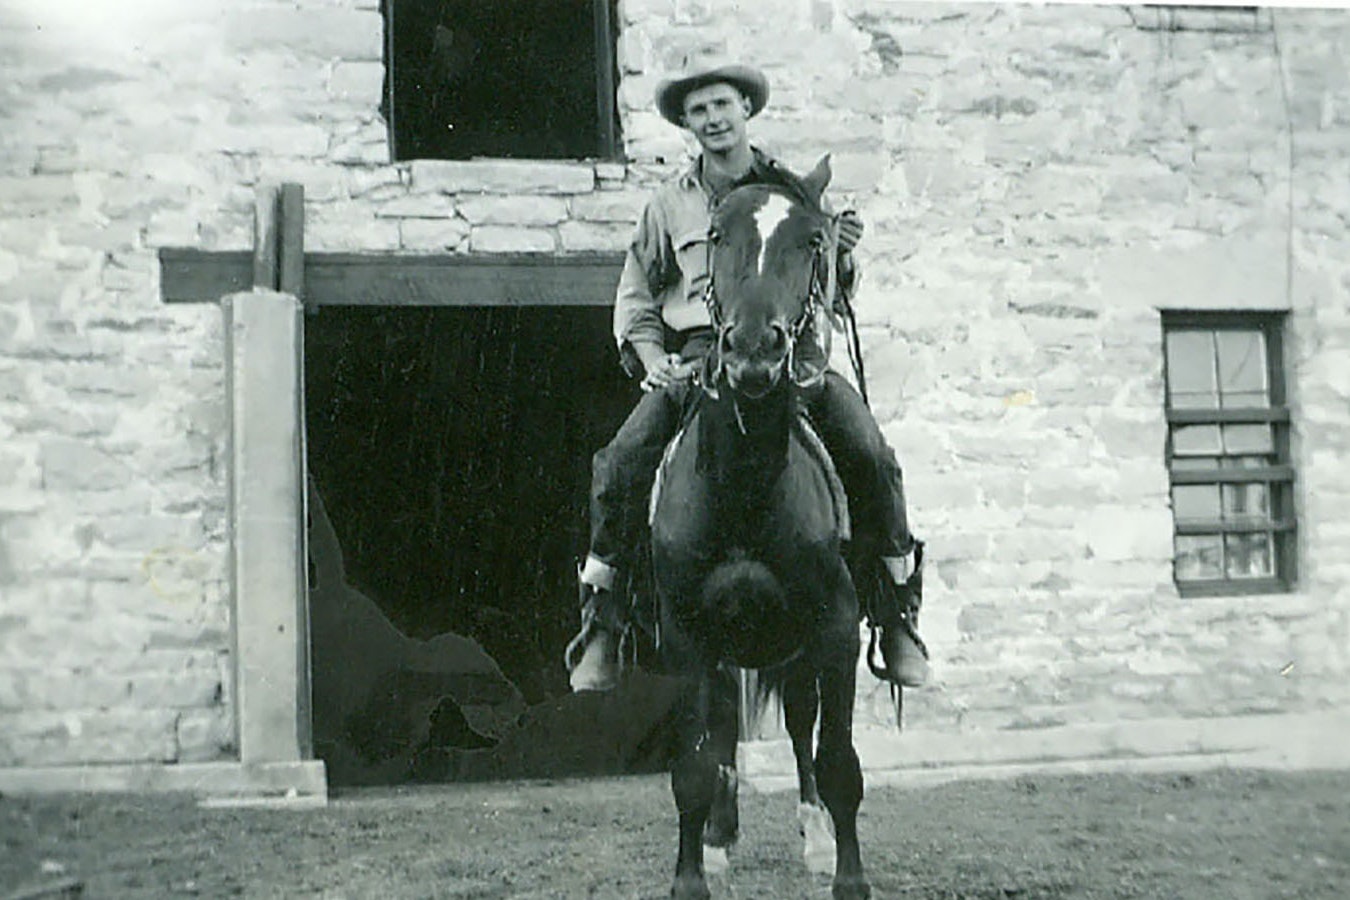 Frank Miller, a 2022 Wyoming Cowboy Hall Of Fame inductee, spent 55 years on horses moving sheep and cattle on his family's multi-generation ranch in Carbon County.